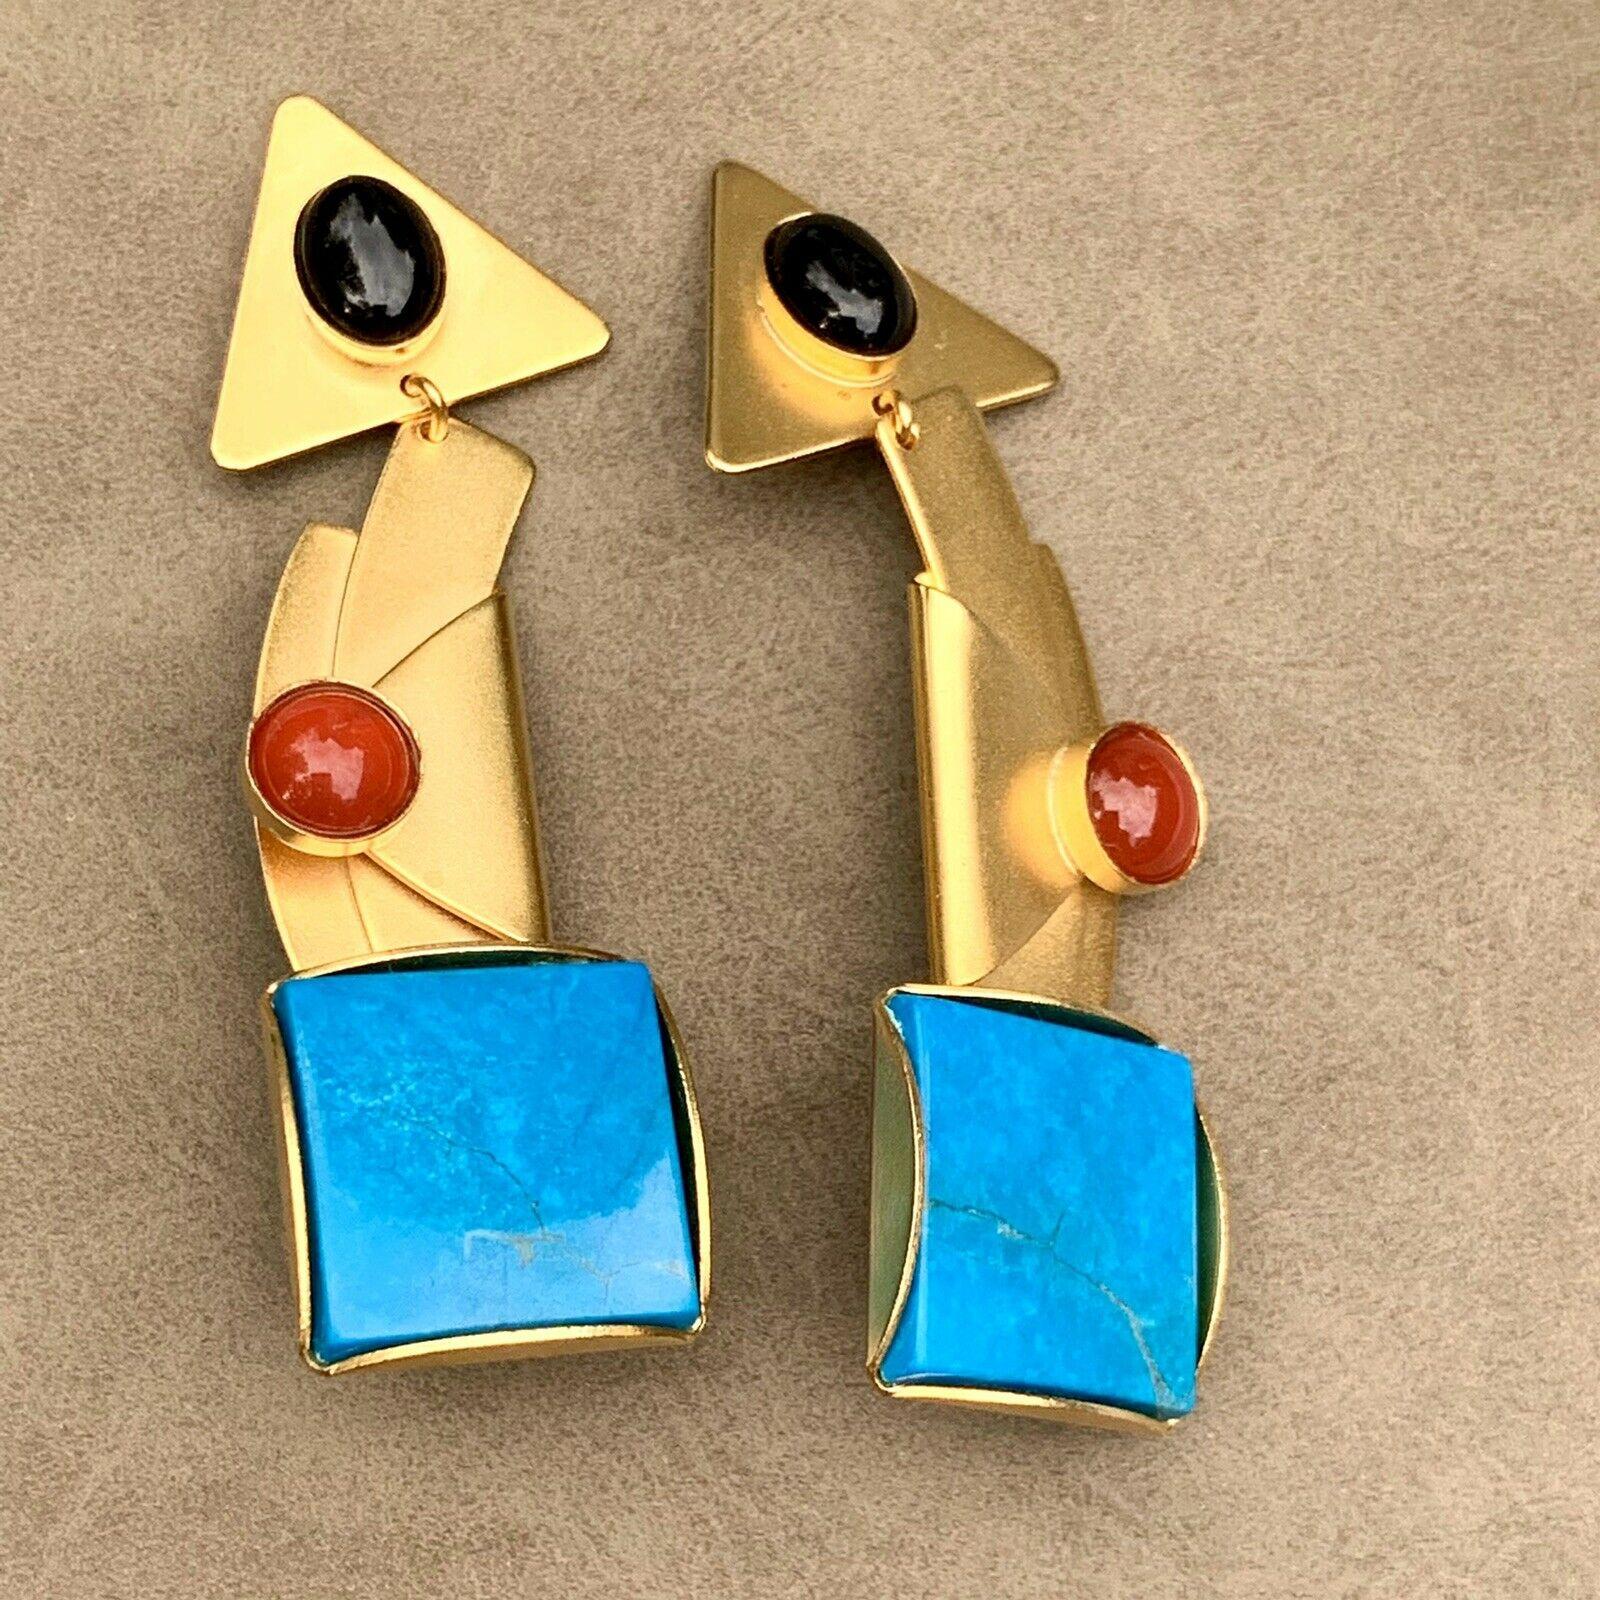 Signed Gale Rothstein Designer Modernist Abstract Multi Gem Drop Earrings In Excellent Condition For Sale In Montreal, QC